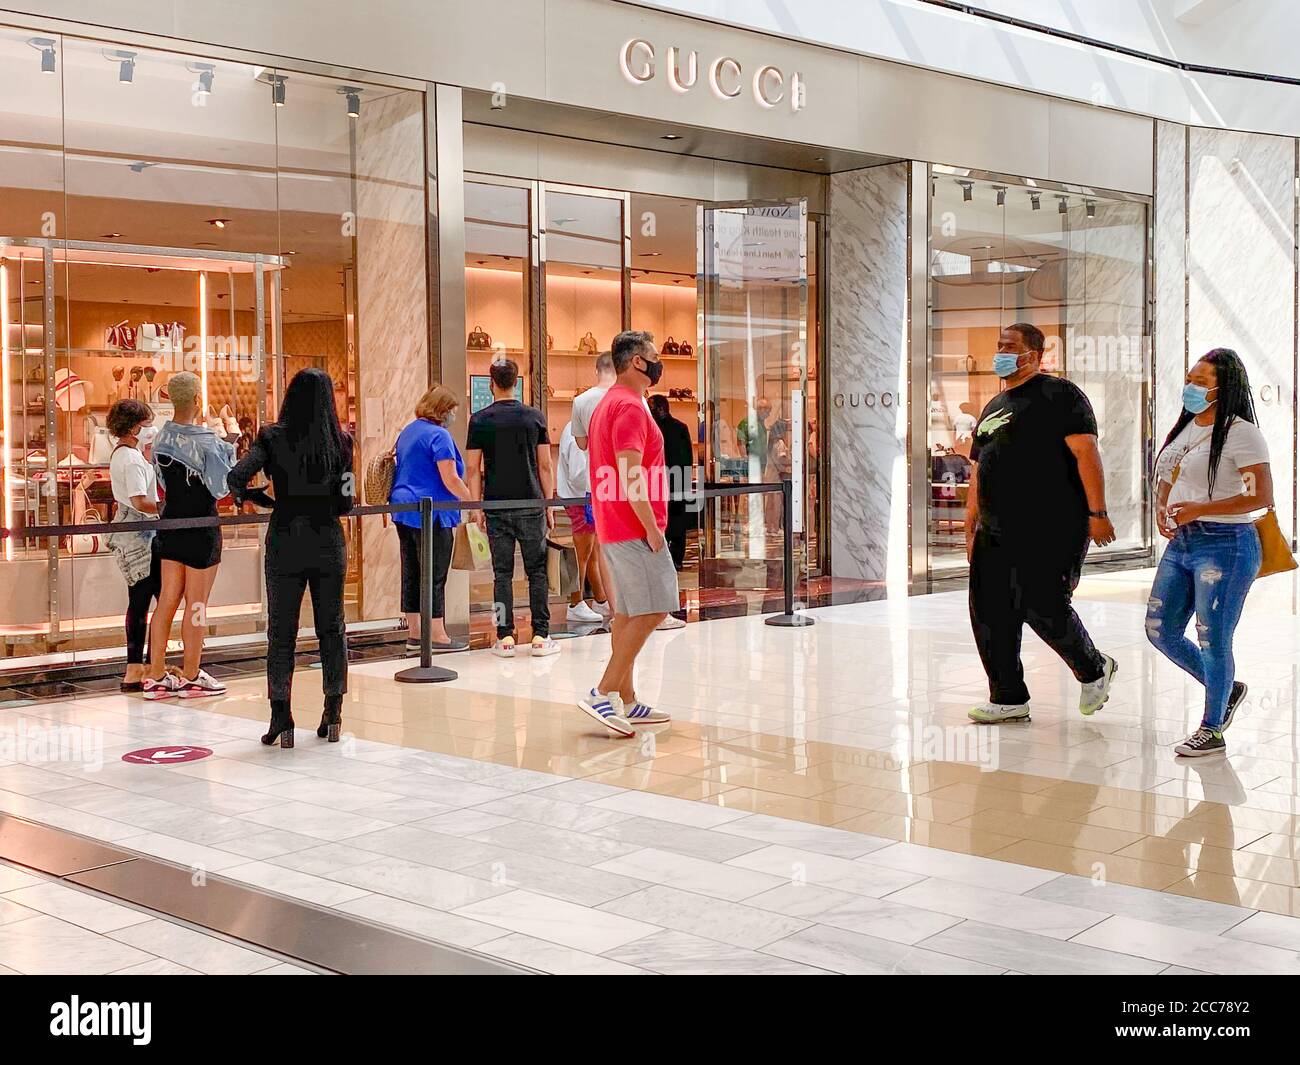 The Gucci Outlet Store Always Have a Long Line 